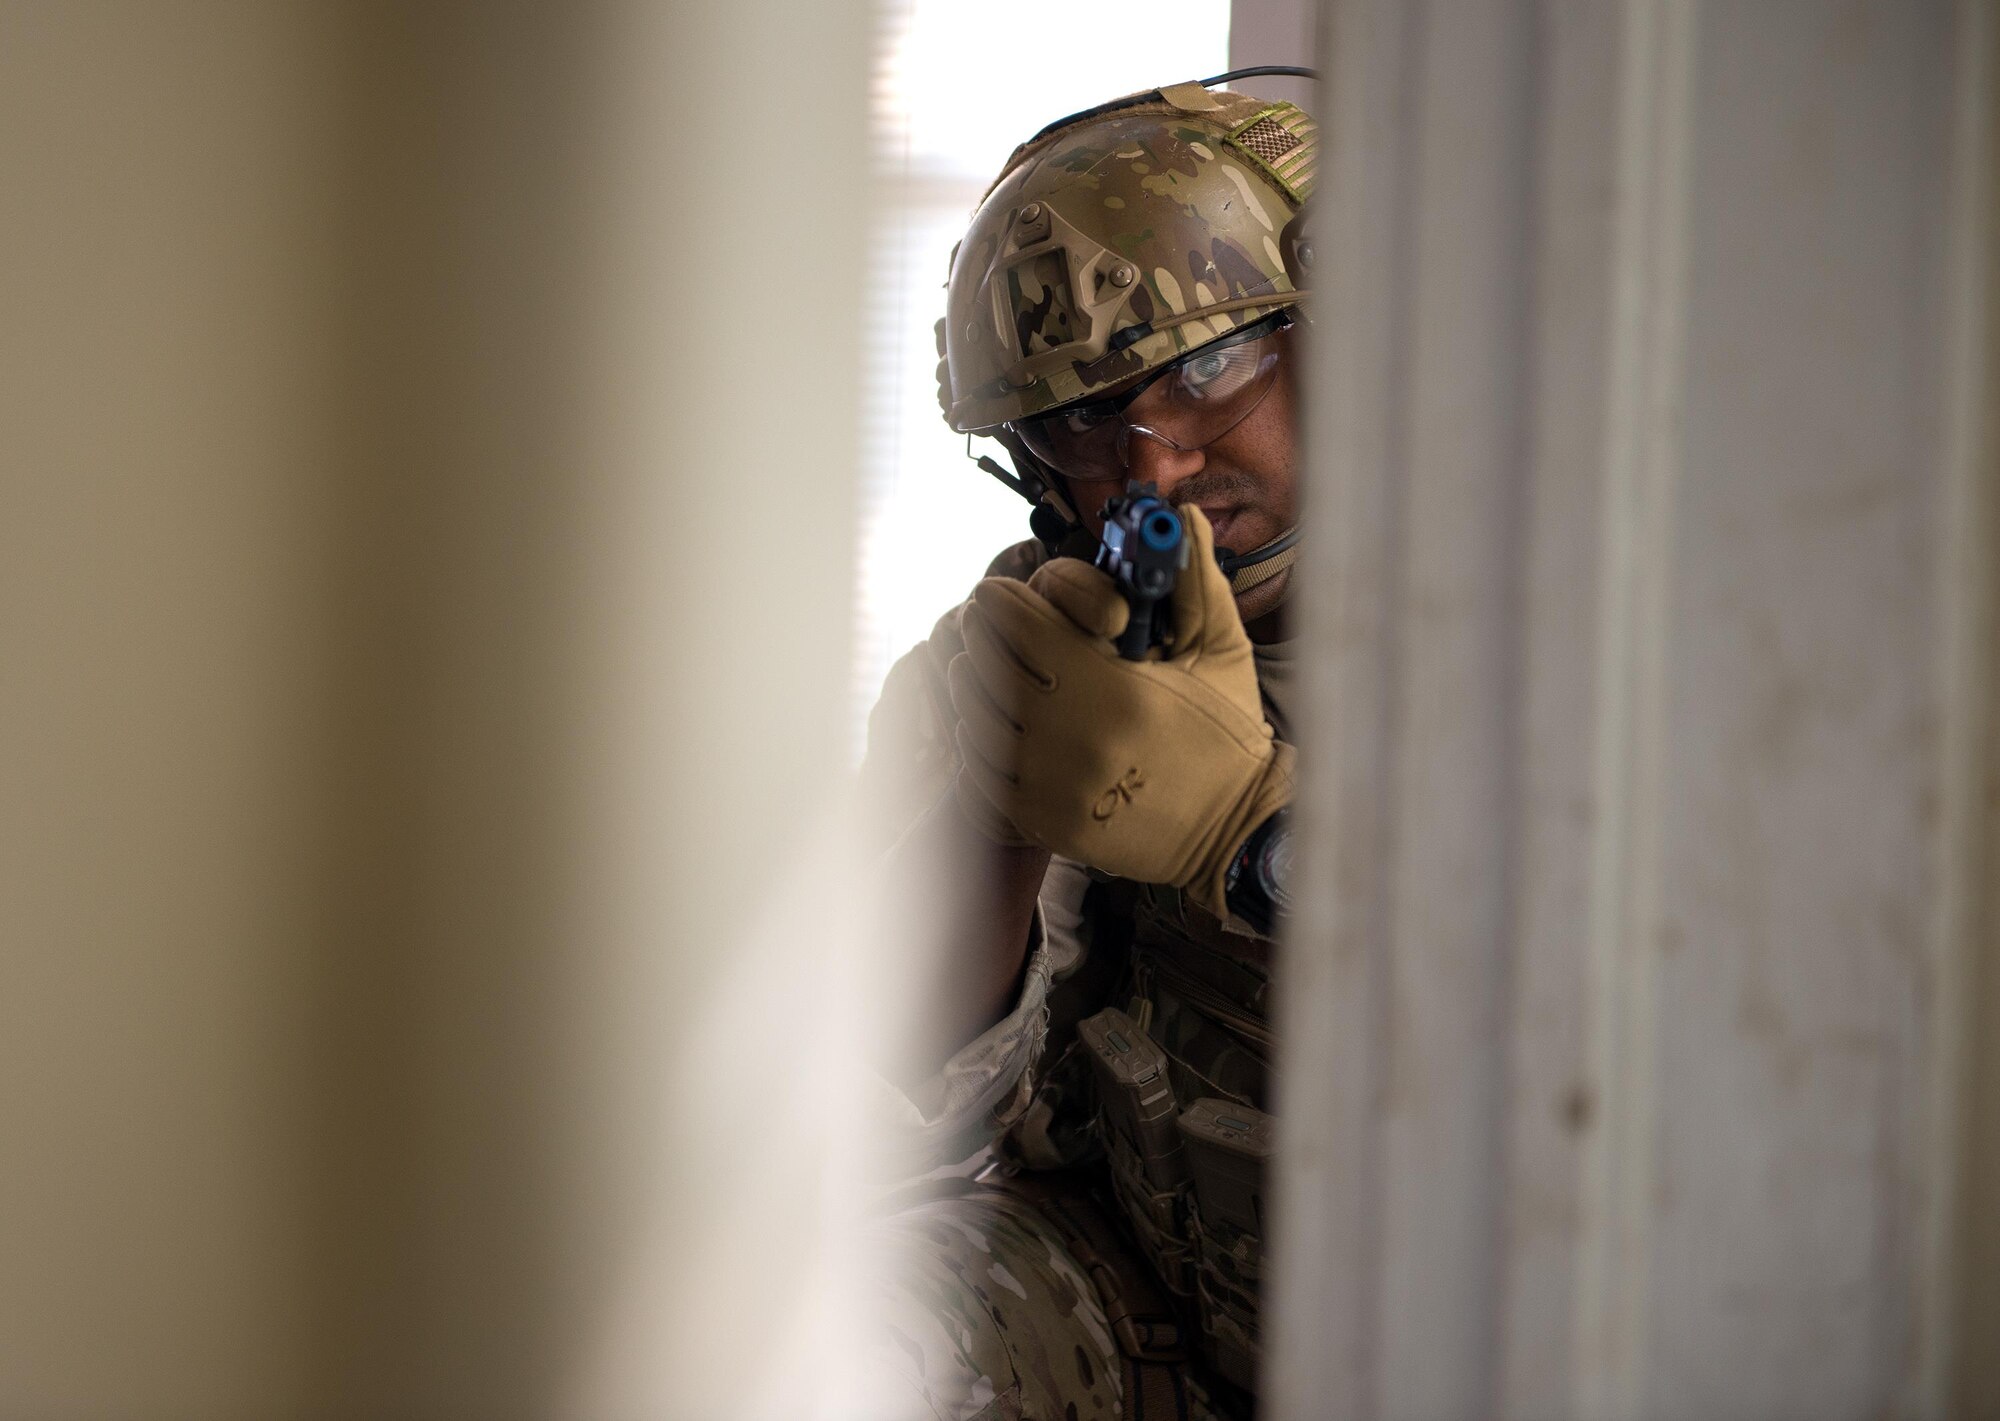 A tactical air control party Airman aims a weapon through a doorway while clearing a structure during special weapons and tactics training at Southern Nazarene University in Bethany, Okla. The class was instructed by the Oklahoma County Sheriff’s Office Oct. 26-Nov. 6, 2015. The Airman is assigned to the 146th Air Support Operations Squadron from the Will Rogers Air National Guard Base in Oklahoma City. (U.S. Air National Guard photo/Master Sgt. Andrew M. LaMoreaux)